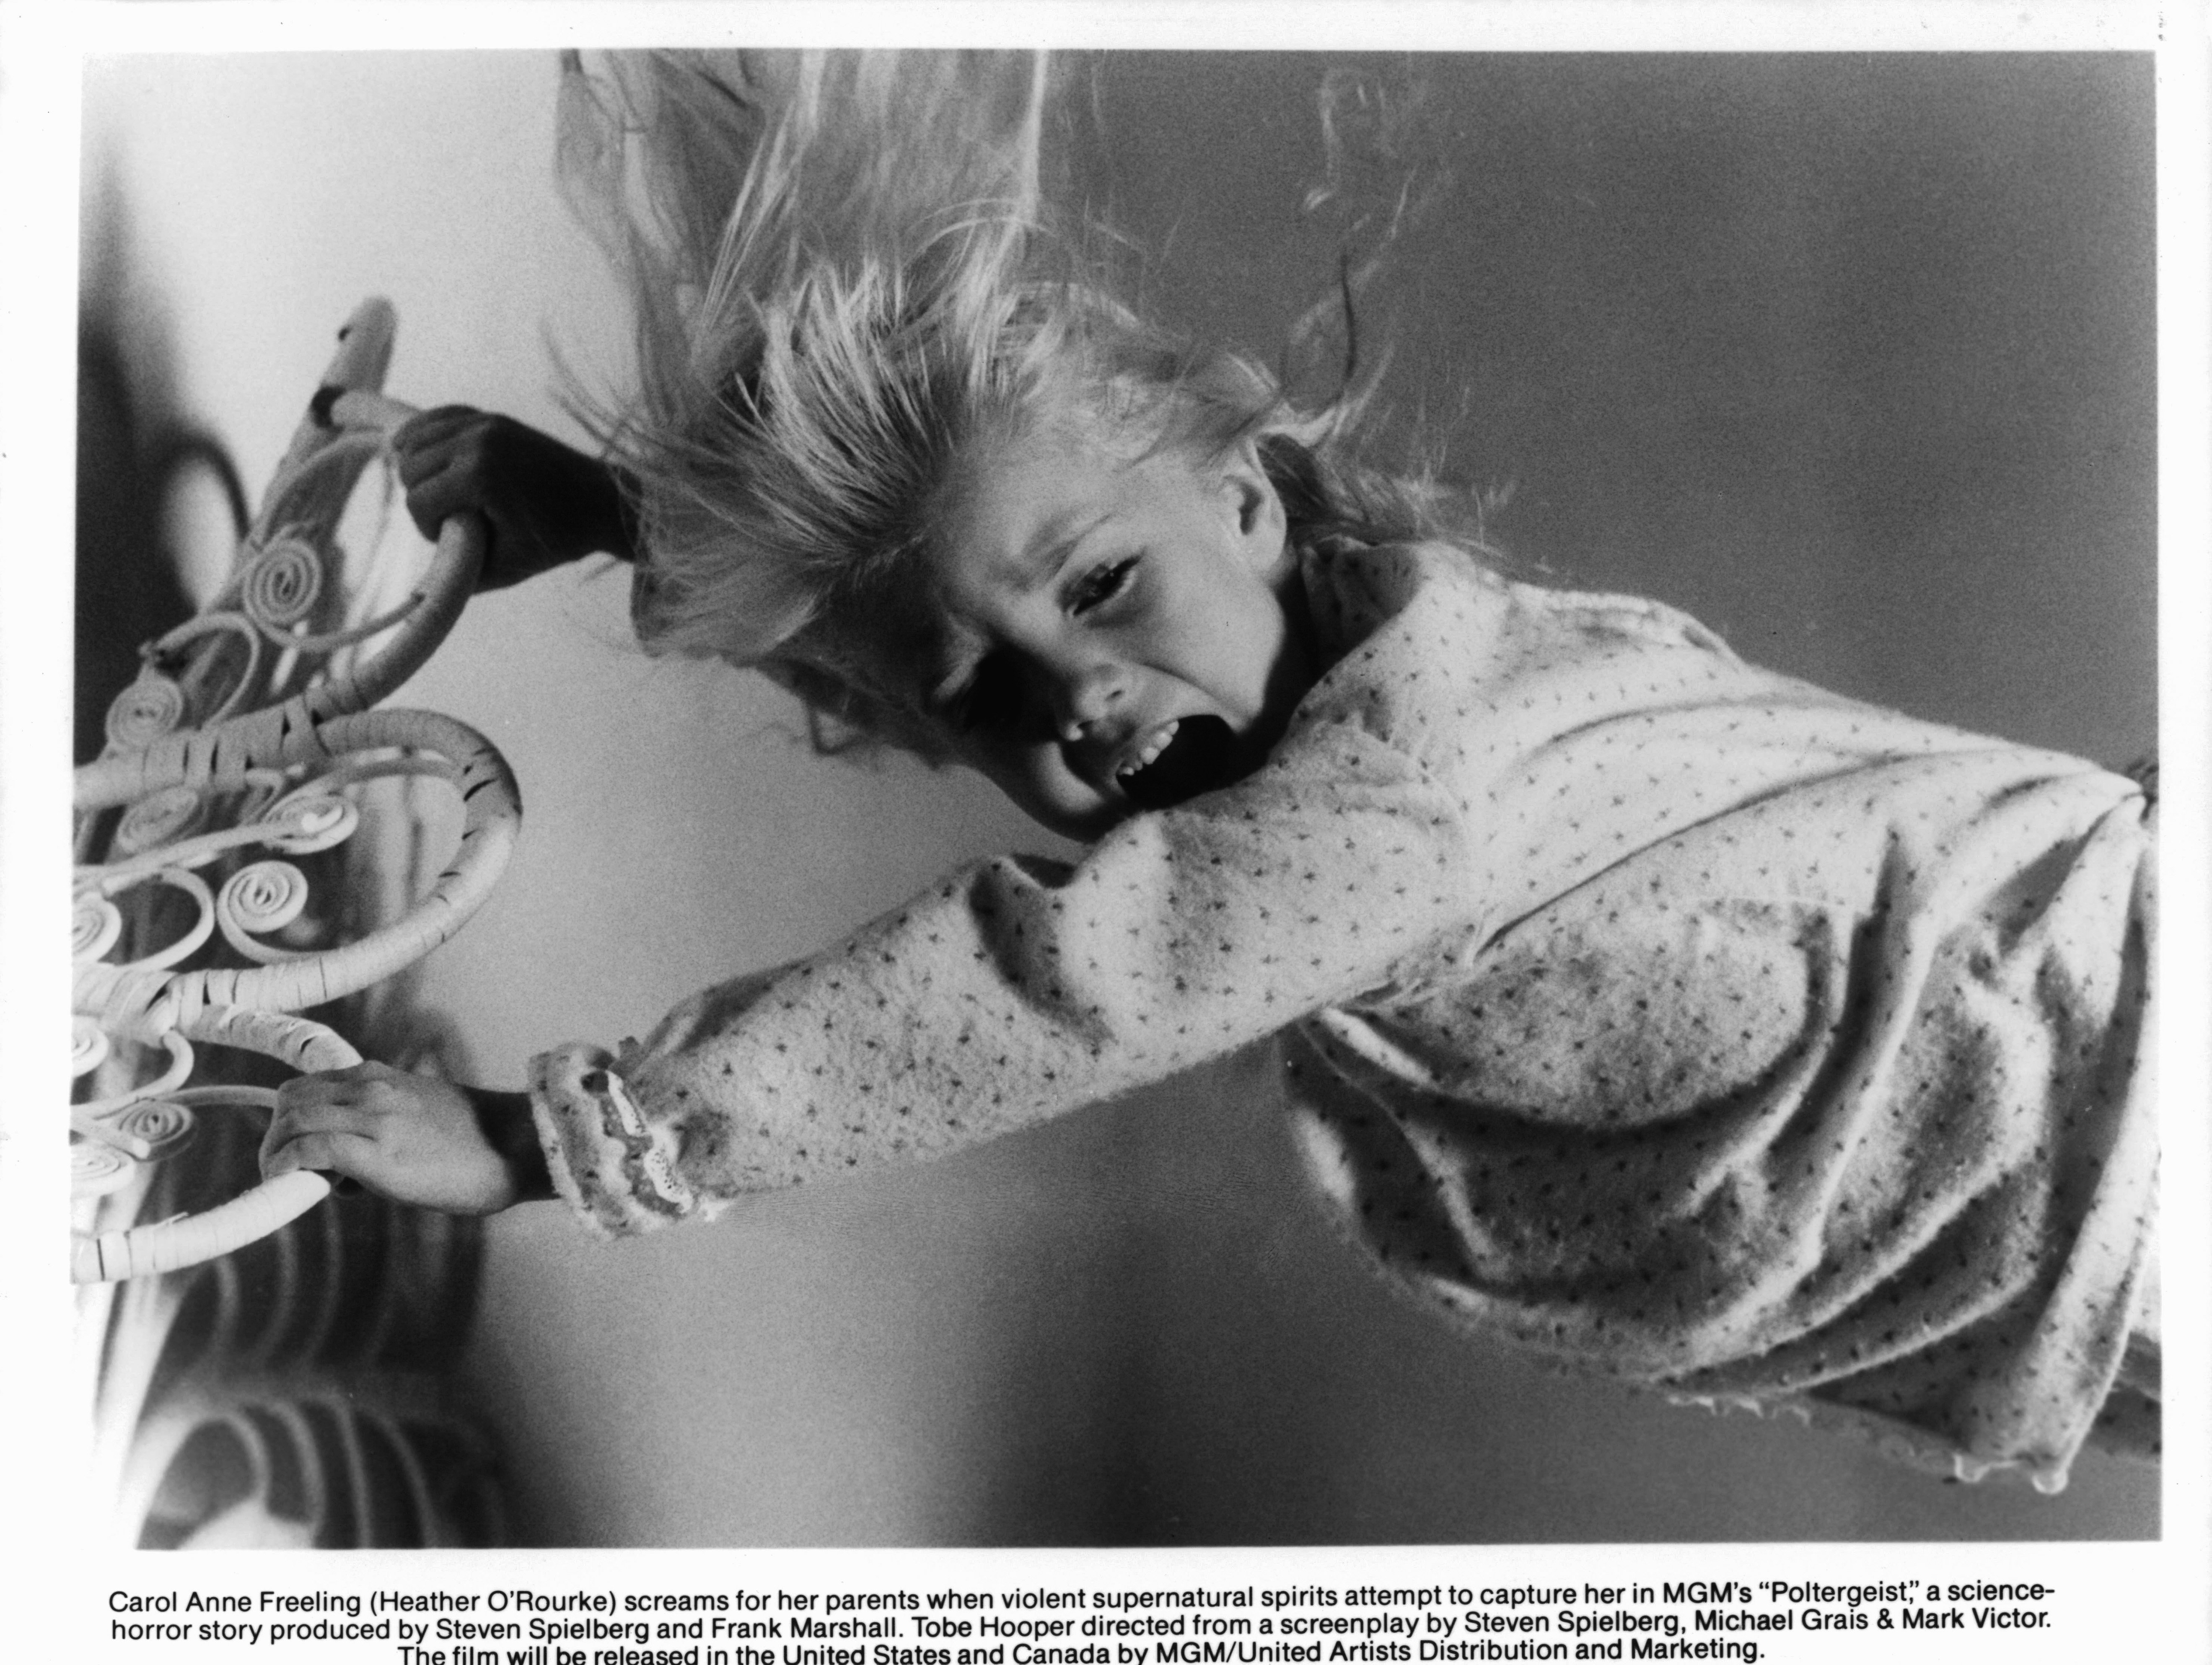 A young Heather O'Rourke grips the bedframe in Steven Spielberg's Poltergeist horror movie, one of the many horror movies based on a true story